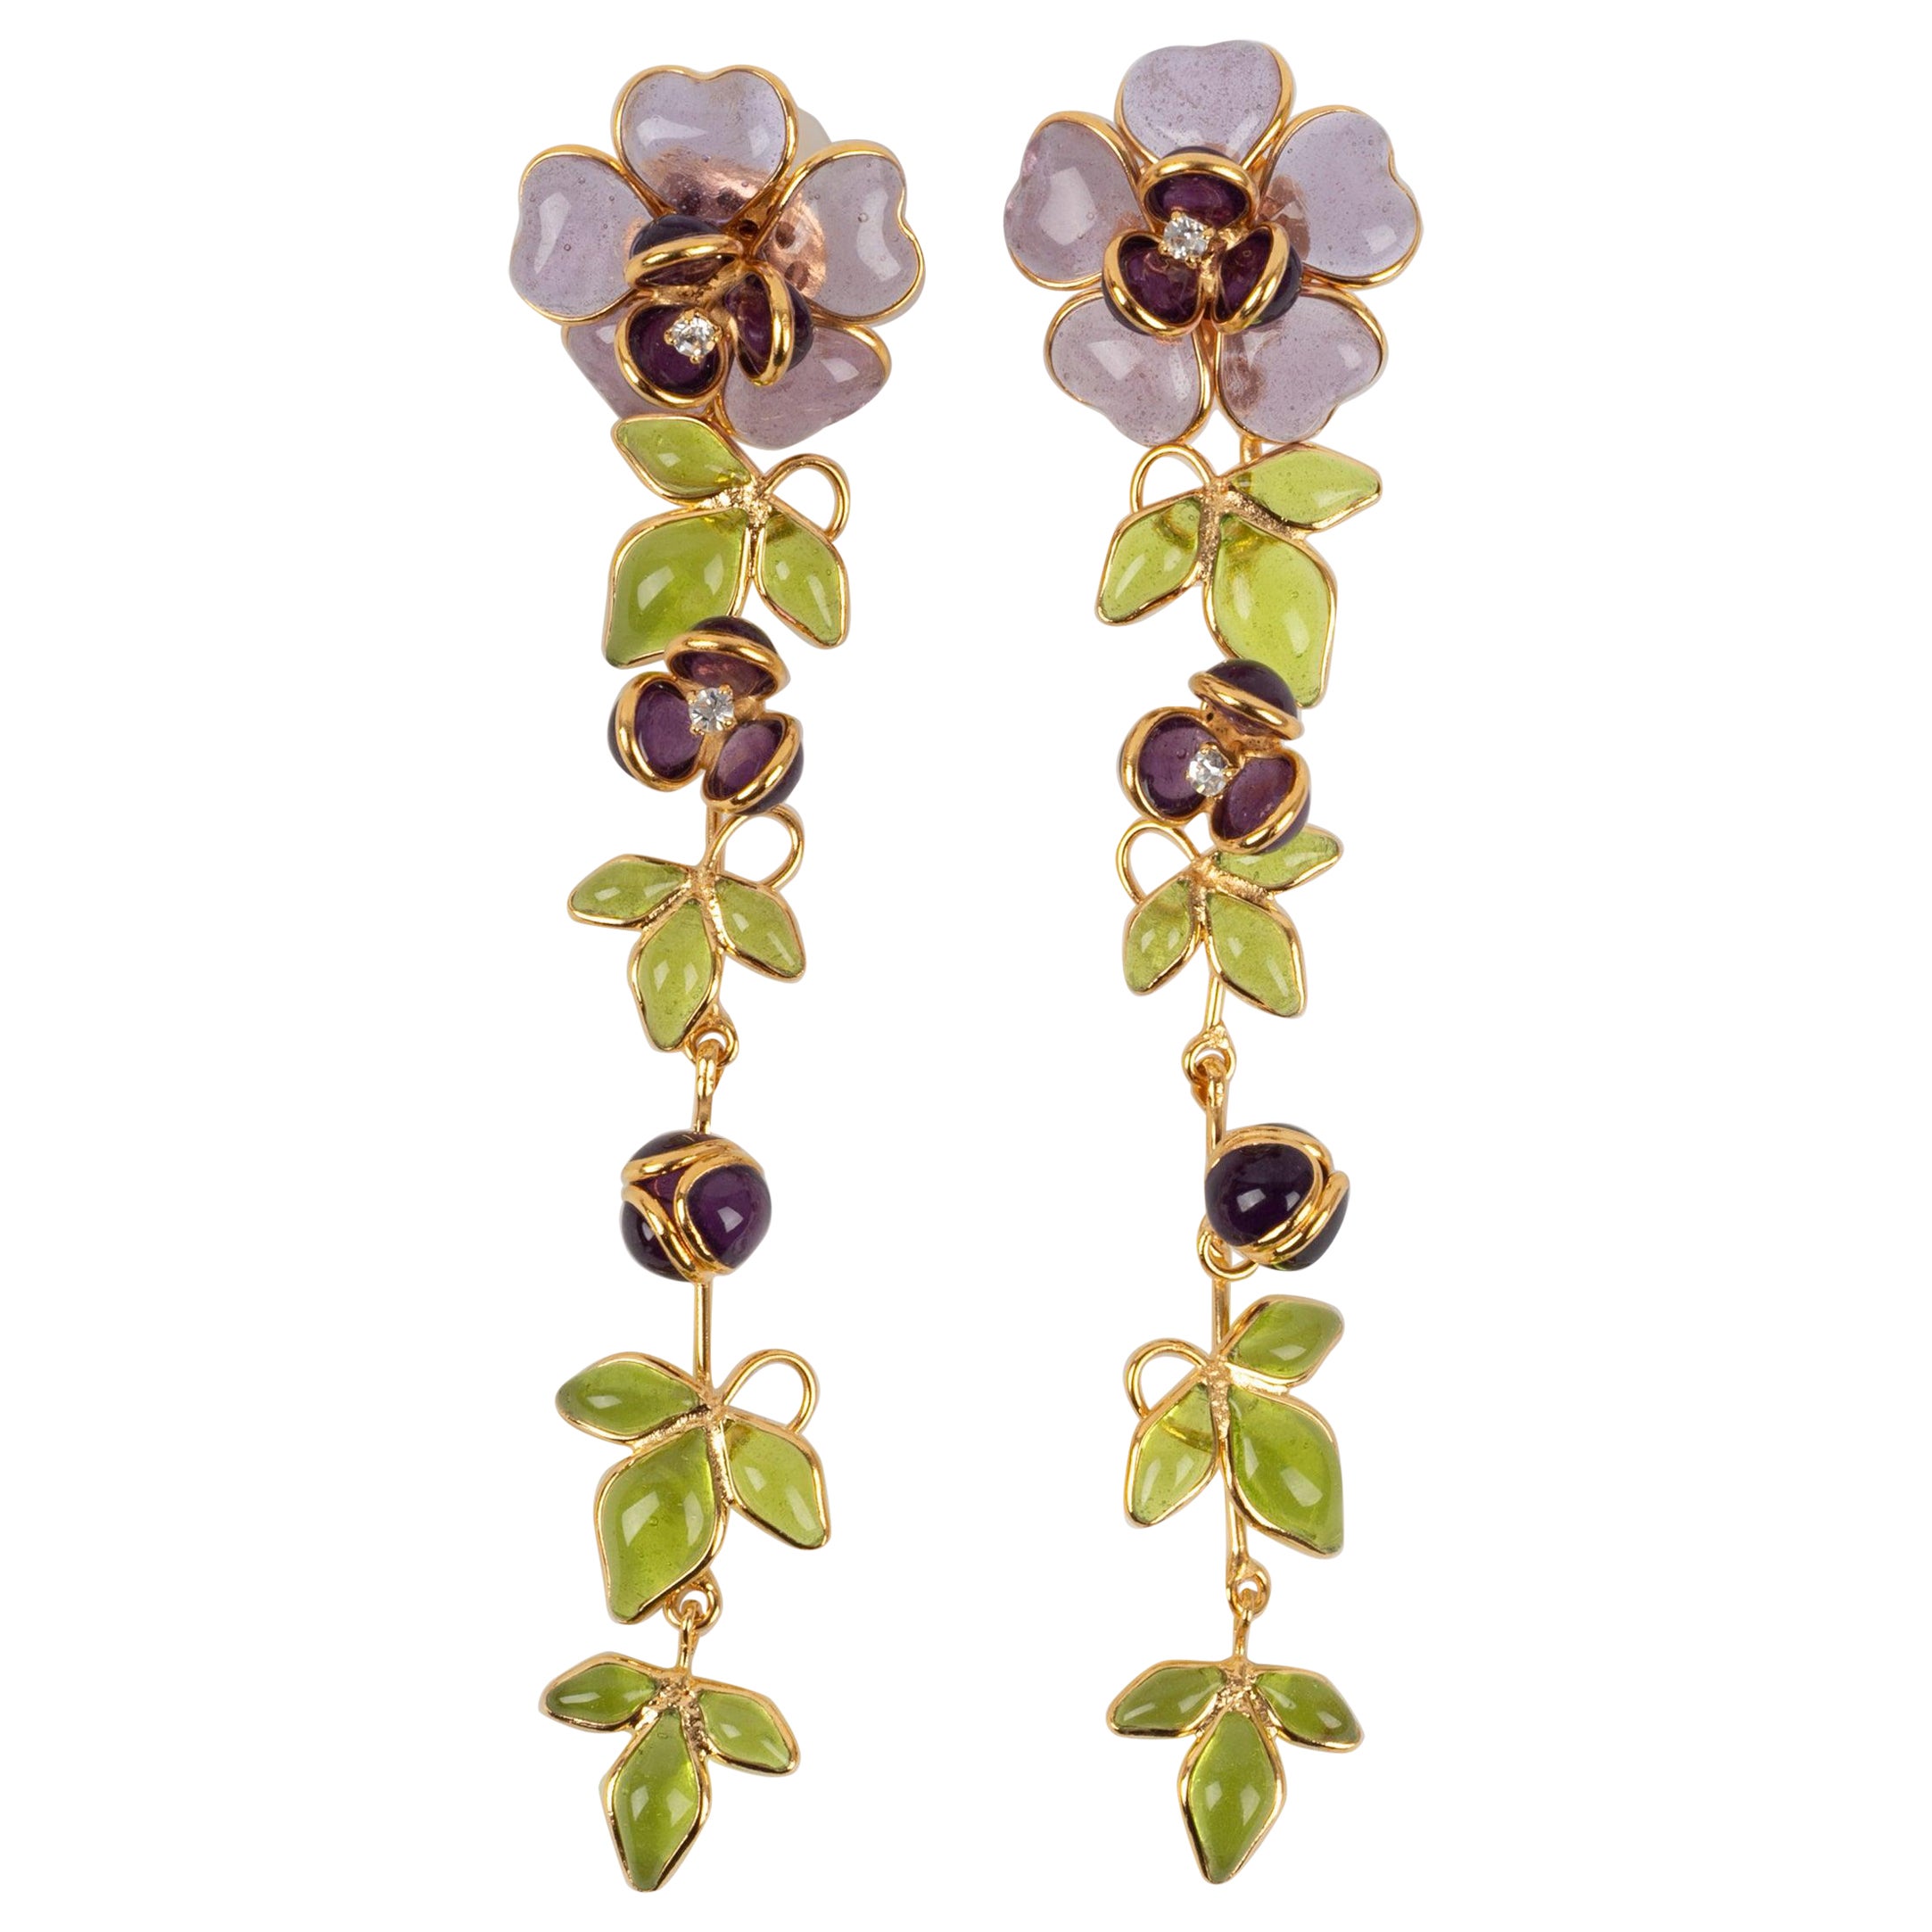 Augustine Golden Metal Earrings with Glass Paste in Purple Tones For Sale